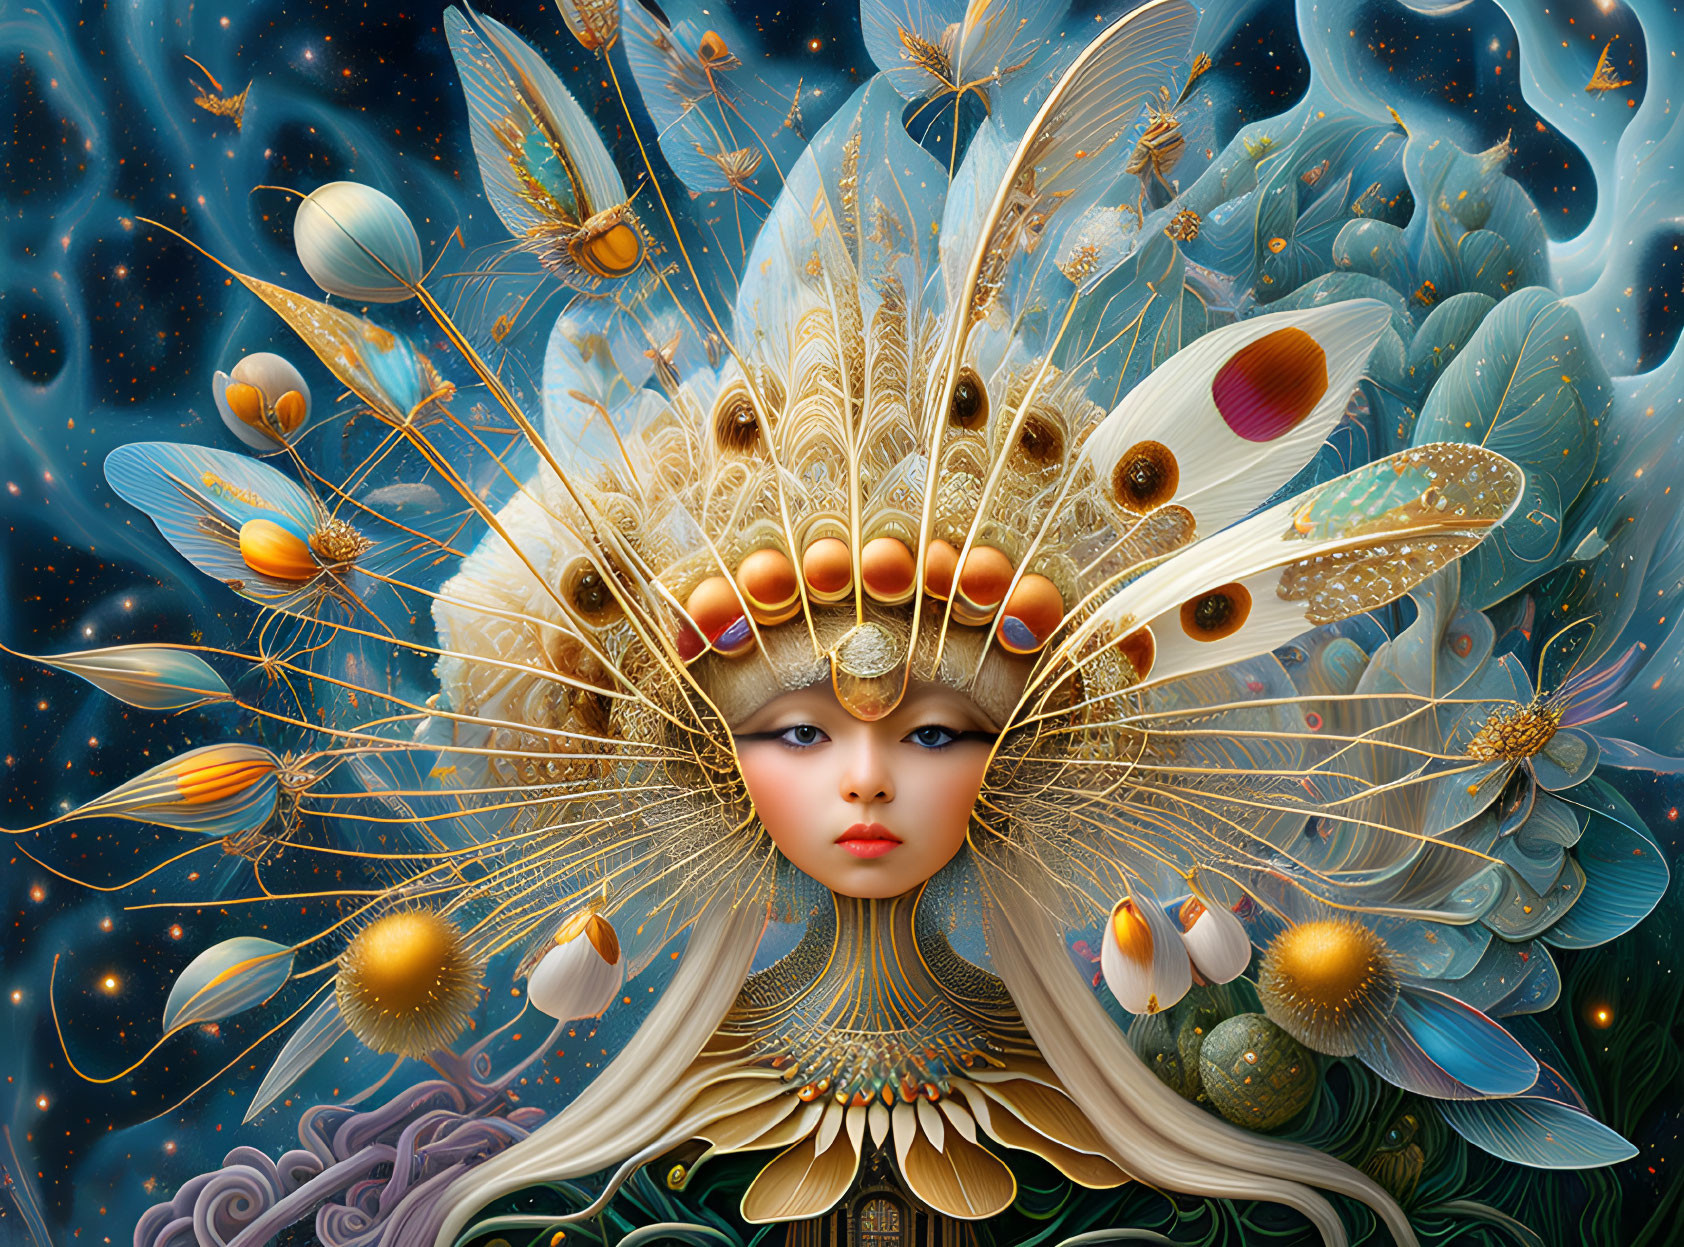 Surreal female figure with peacock feather headdress in cosmic scene